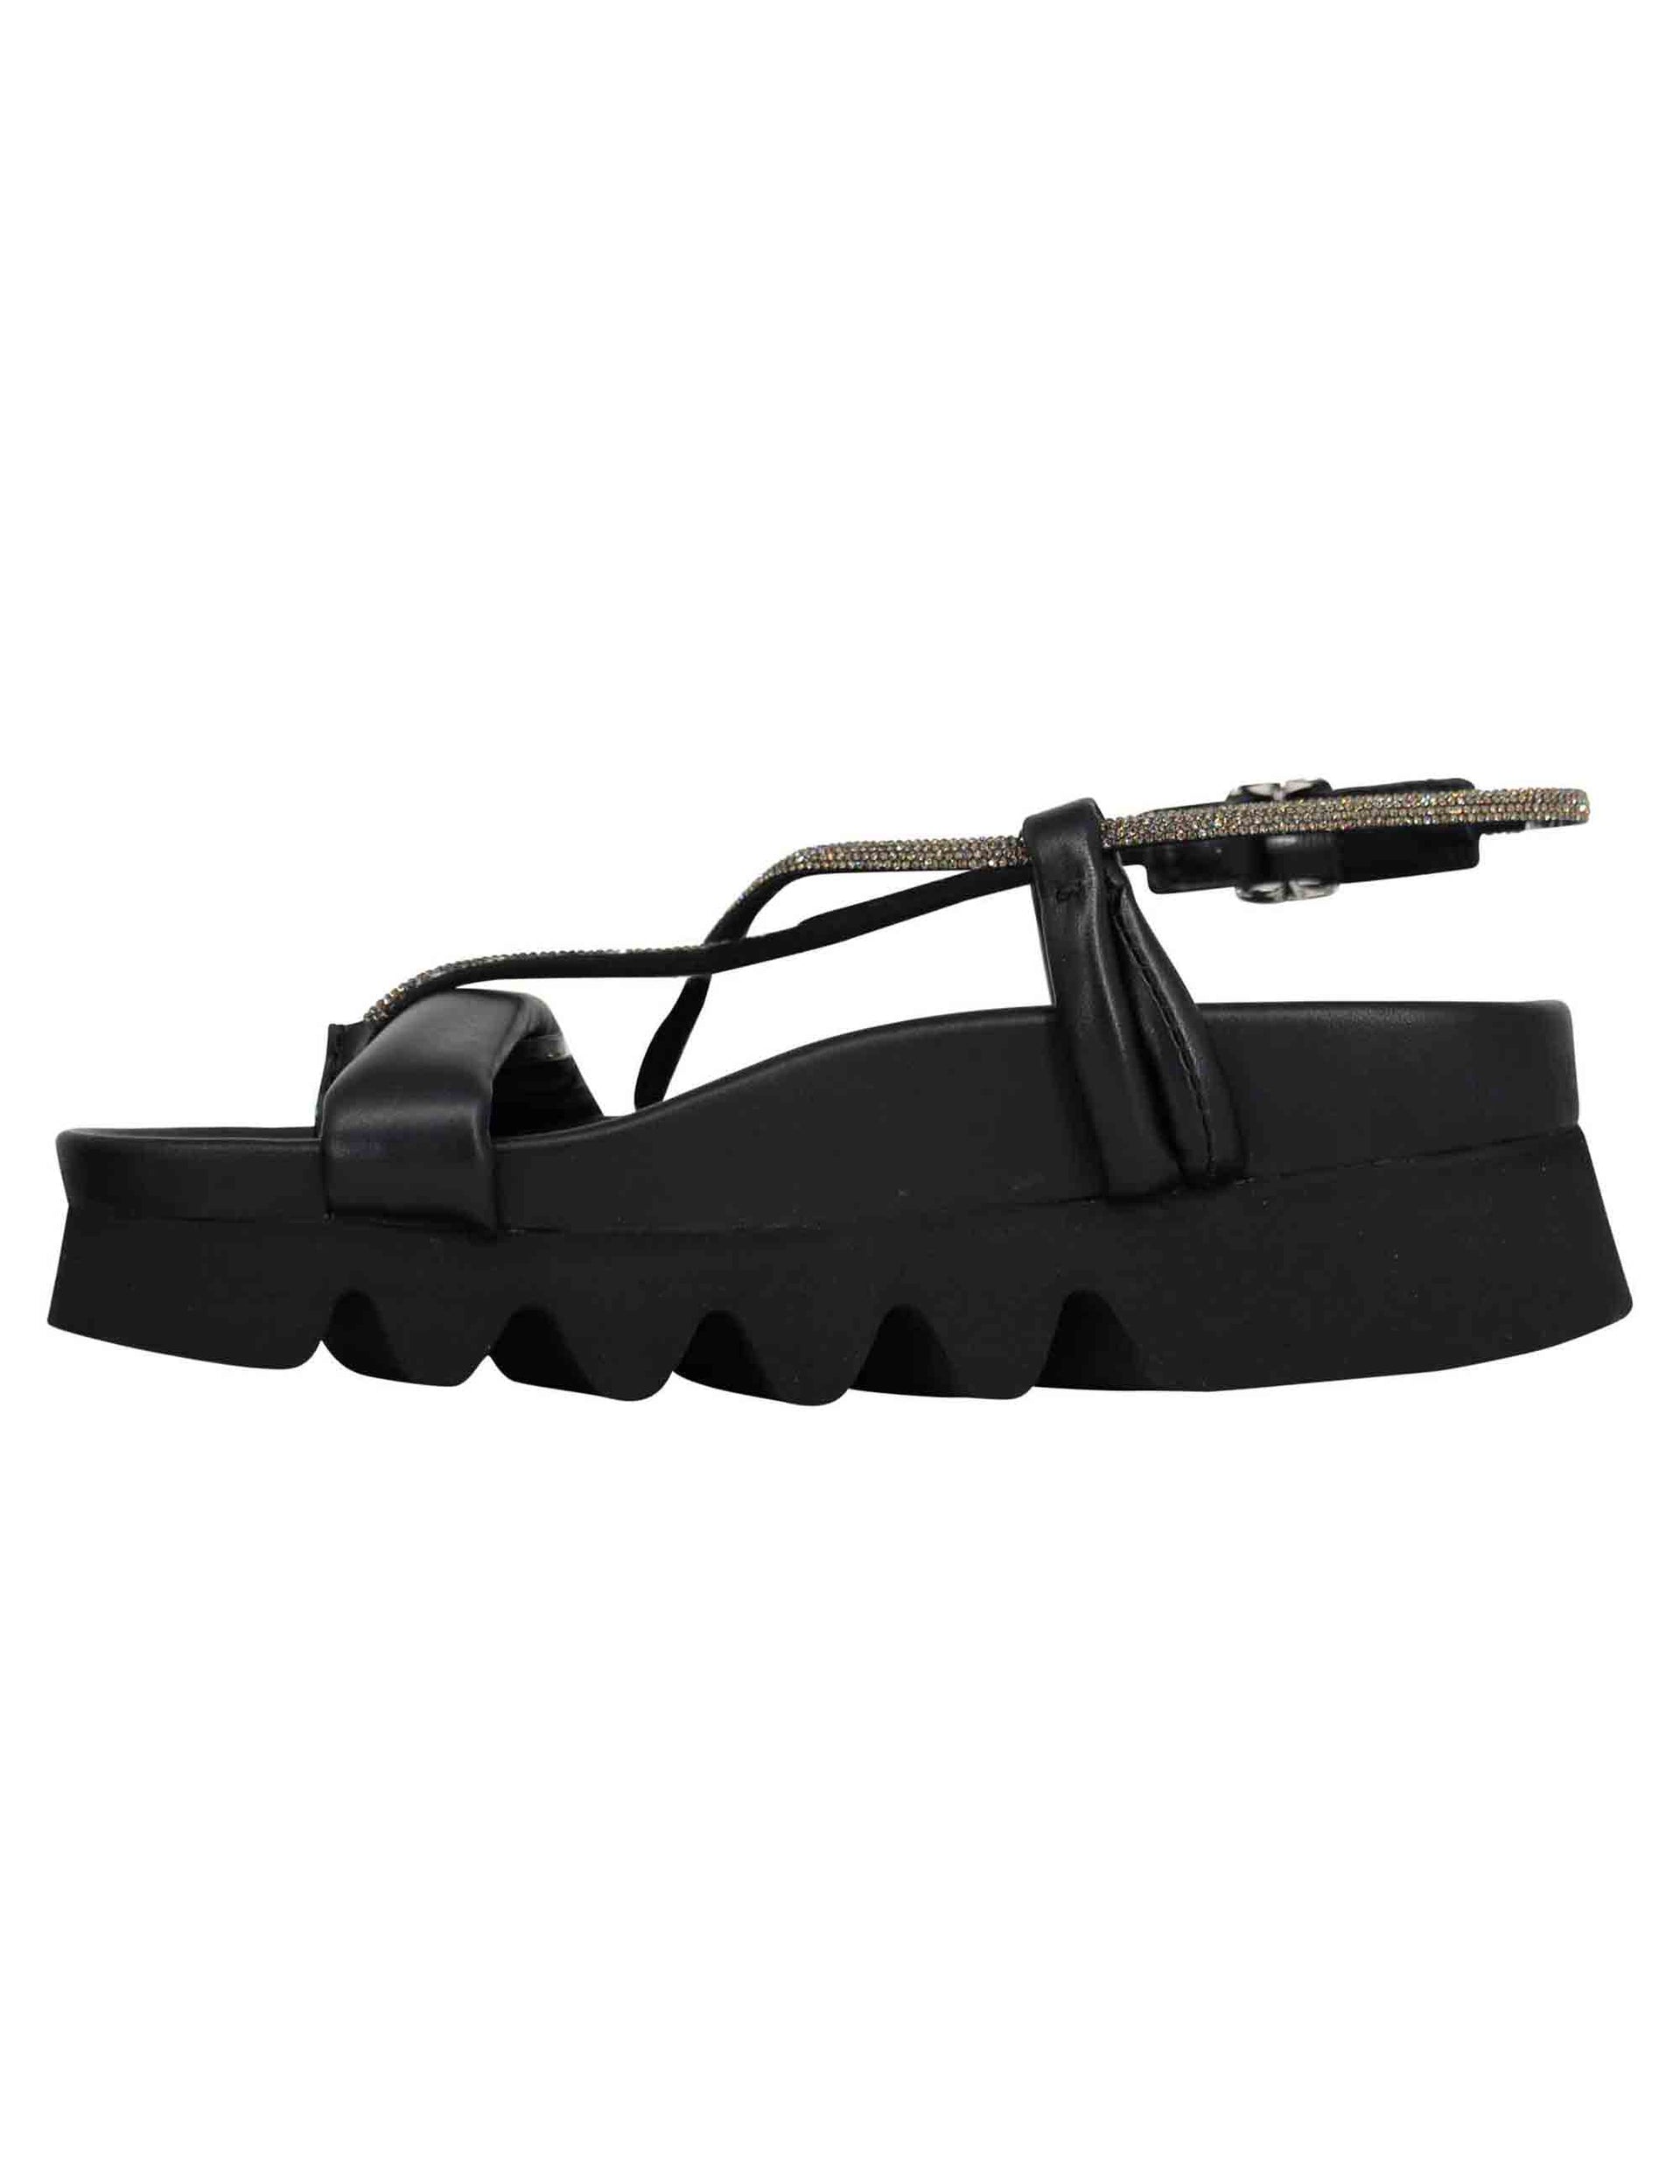 Women's black leather thong sandals with rhinestone straps and lug sole